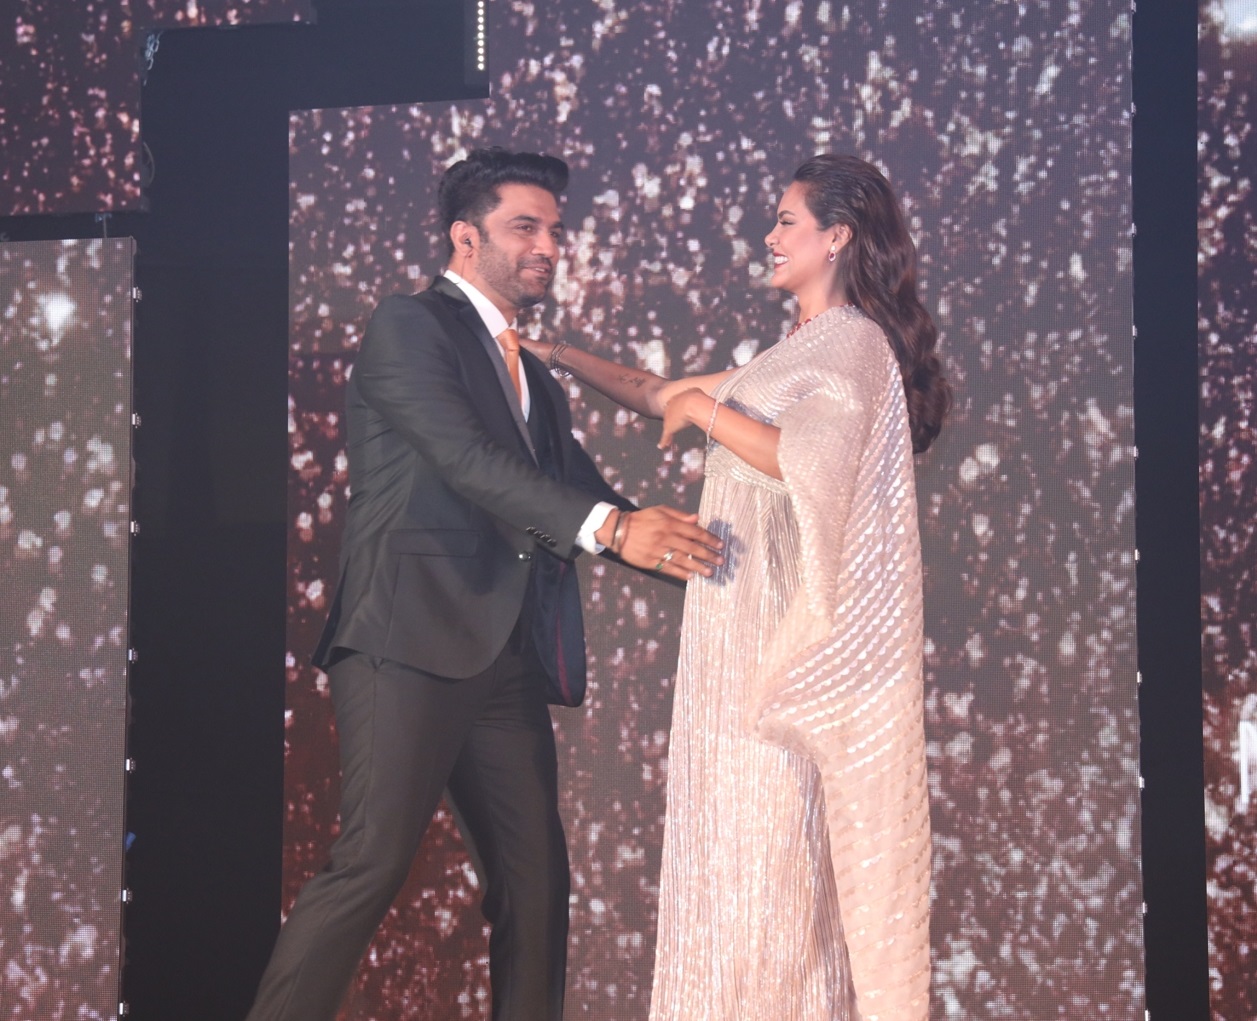 Bollywood Diva Neha Gupta and Actor Sharad Kelkar greet each other at the 9th edition of the National Jewellery Awards 2019, held in Mumbai over the weekend. NJA 2019 was organised by All India Gem and Jewellery Domestic Council (GJC). Over 35 awards in total 8 categories were given to jewellers for their outstanding achievement in the jewellery industry